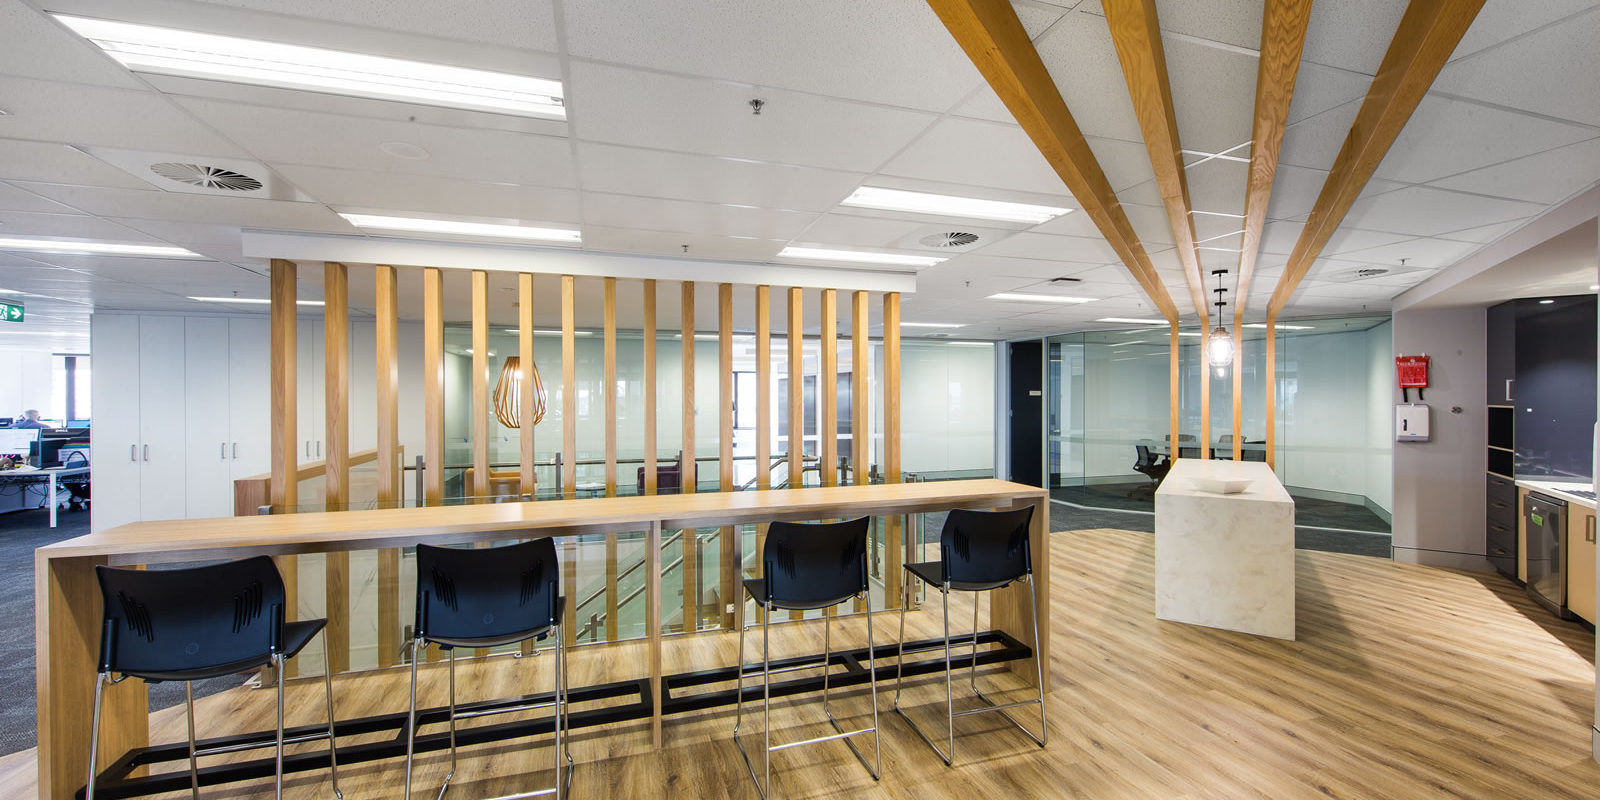 Flexible workplace joinery solutions